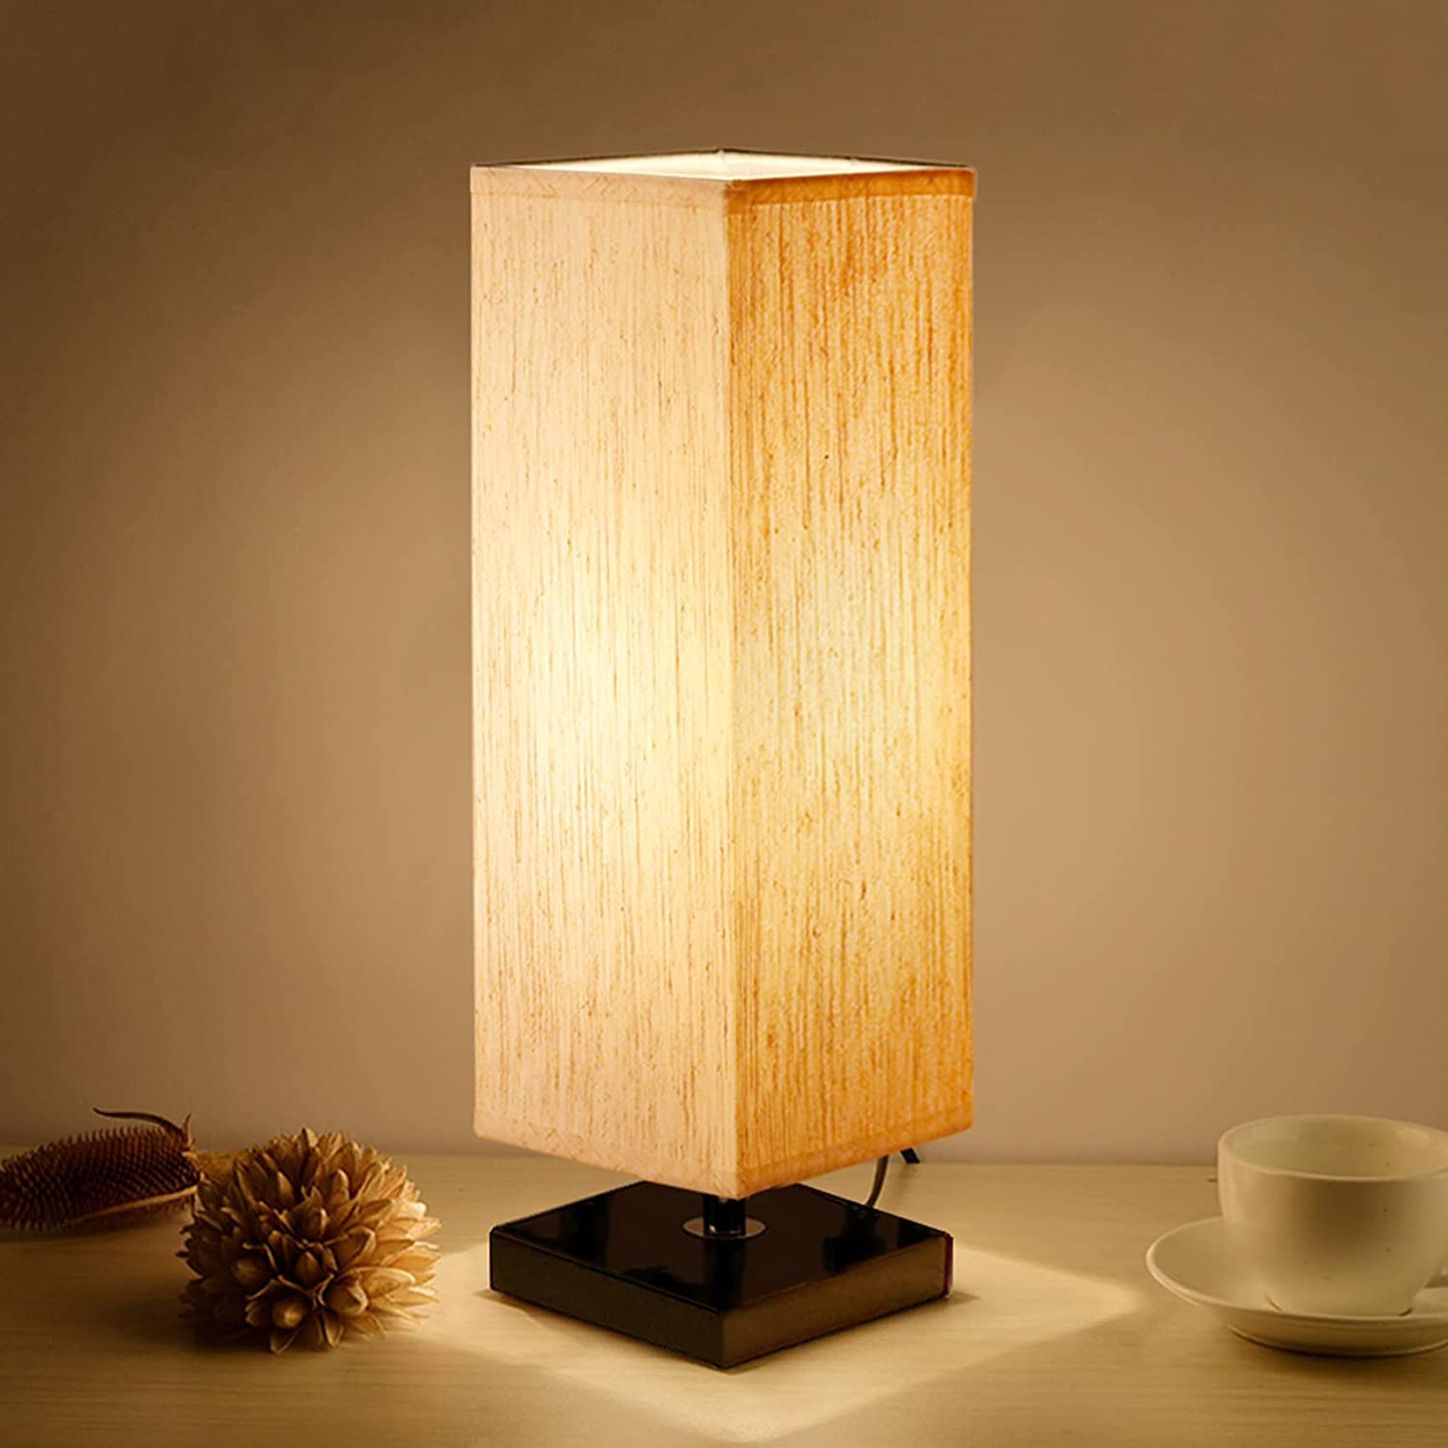 22 Best Bedside Lamps 2021 The Strategist, Modern Lamps For Nightstands